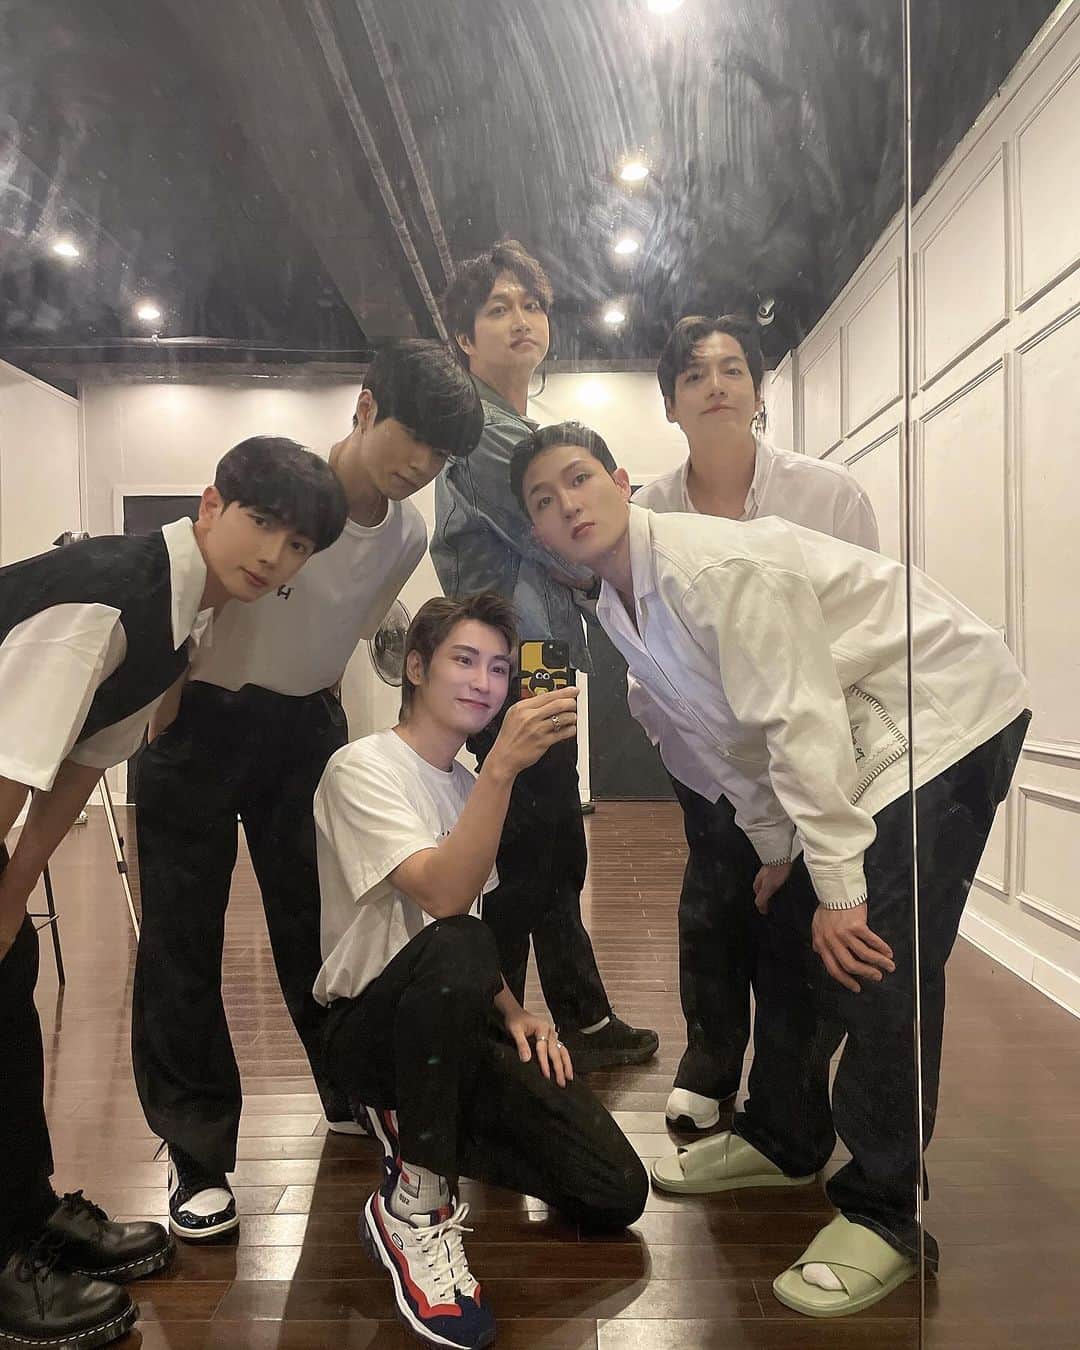 IN2ITさんのインスタグラム写真 - (IN2ITInstagram)「#IN2IT #SKYE Happy 6th Debut Anniversary #1026 🐵🐵🐔🐶🐶🐷   I hate these guys but love them at the same time HAHAHA because every time when I’m with them I feel like I am a 3 years old kid 👦🏻 because they always take care of me buy me food makes me laugh makes me cry makes me angry makes me miss them 👁️💙👁️ honestly im glad to meet all of them because they tought me a lot in Korea   And I miss all of those memories we made in Korea we woke up together ; brush teeth together ; bath together (sometimes because we in a hurry HAHAH) ; work together ; laugh together ; cry together ; going to all of those countries first time together ; cook together ; play games together ; meet IN2U together ; fight together (sometimes Jiahn and Inpyo like kids they fight in the house like gusti use fake sword that UU gave and fight)   Conclusion : you guys are always my best buddy no matter what happened love you all so much @jiahnx_foolsday @yeontae_j @from.eno @hyuuunuk @lee1npyo @official_in2it   TMI of the members  #Jiahn : sometimes really like kid seriously I don’t lie hahahahahaga but still he always accompany me to shopping without saying no  #Yeontae : he is like a person who don’t show his kindness to people but actually he is and I always live in his house when I visited to korea and he always spent me makchang HAHAHA  #Inho : he was my roommate every time when we travel to other countries and I think only both of us eat a lot cause we always bought a lot and share together  #Hyunuk : he is really my best buddy because when I was down he always cheered me up and I said I don’t have much line in a song he even asked the director to give me his line  #Inpyo : even tho he is maknae but sometimes I felt he’s so cool maybe because he is our leader and he lead us well and because he’s the tallest I like lean on his shoulder hahaha   Ok too long kthxbye looks forward to our future and can’t wait to share more good news to UU 💙💙  #IN2IT #SKYE #1026 #isaacVkm #邬凯名 #아이젝 #젝그 #인투잇 #스카이 #지안 #연태 #인호 #현욱 #인표」10月26日 21時08分 - official_in2it